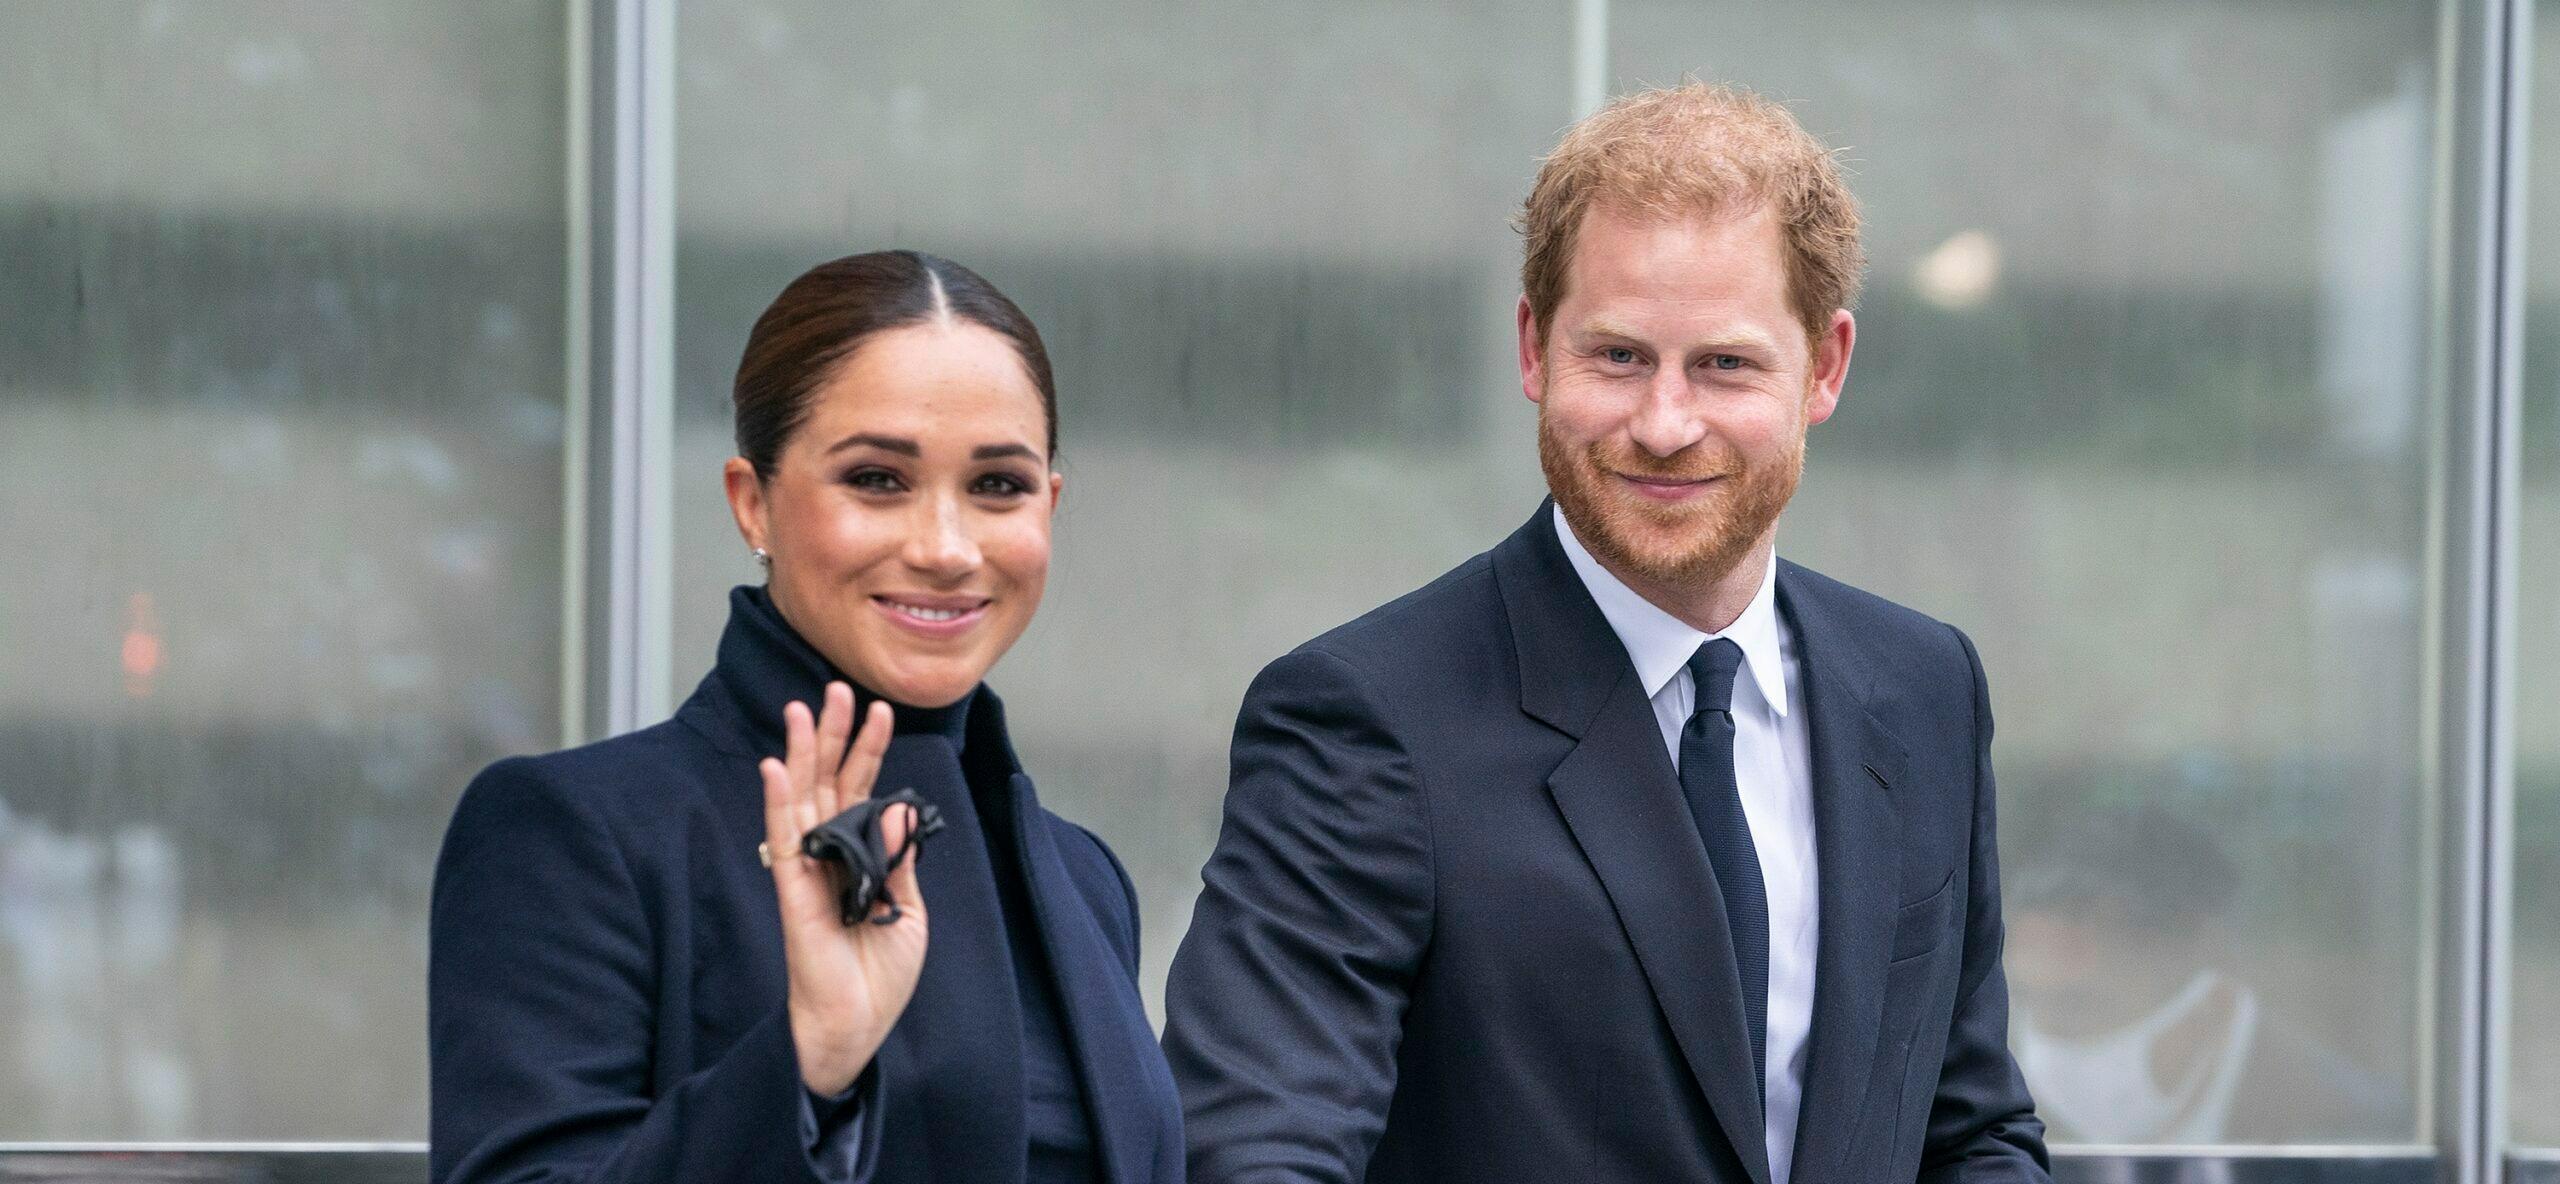 The Duke Of Sussex Prince Harry ‘Elevated’ To THIS Prestigious New Role!